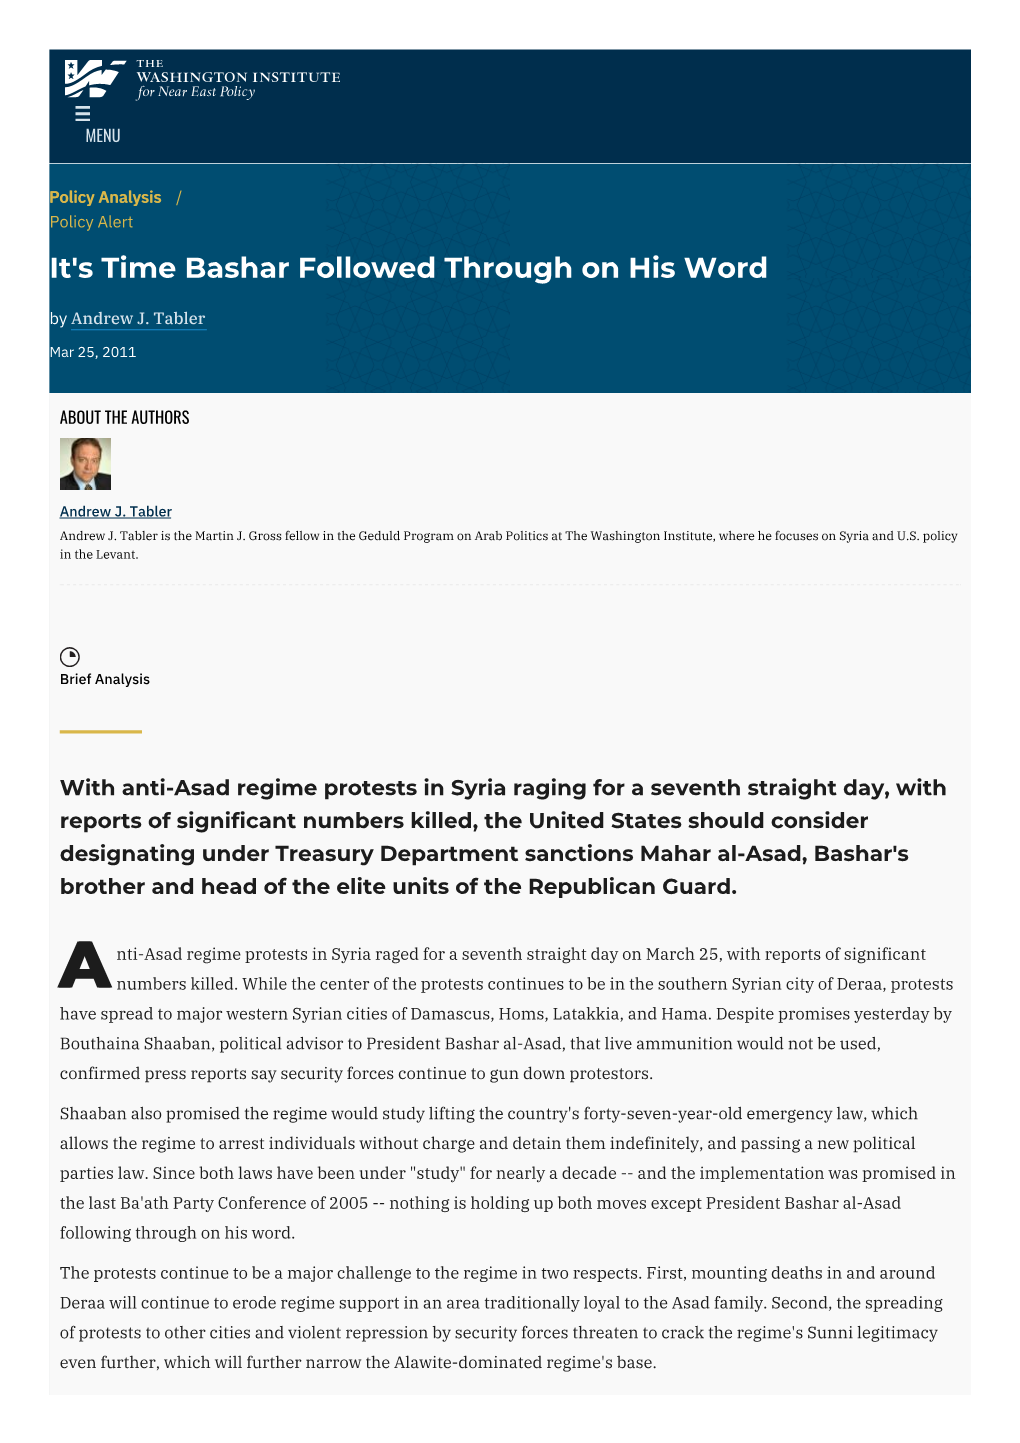 It's Time Bashar Followed Through on His Word | the Washington Institute